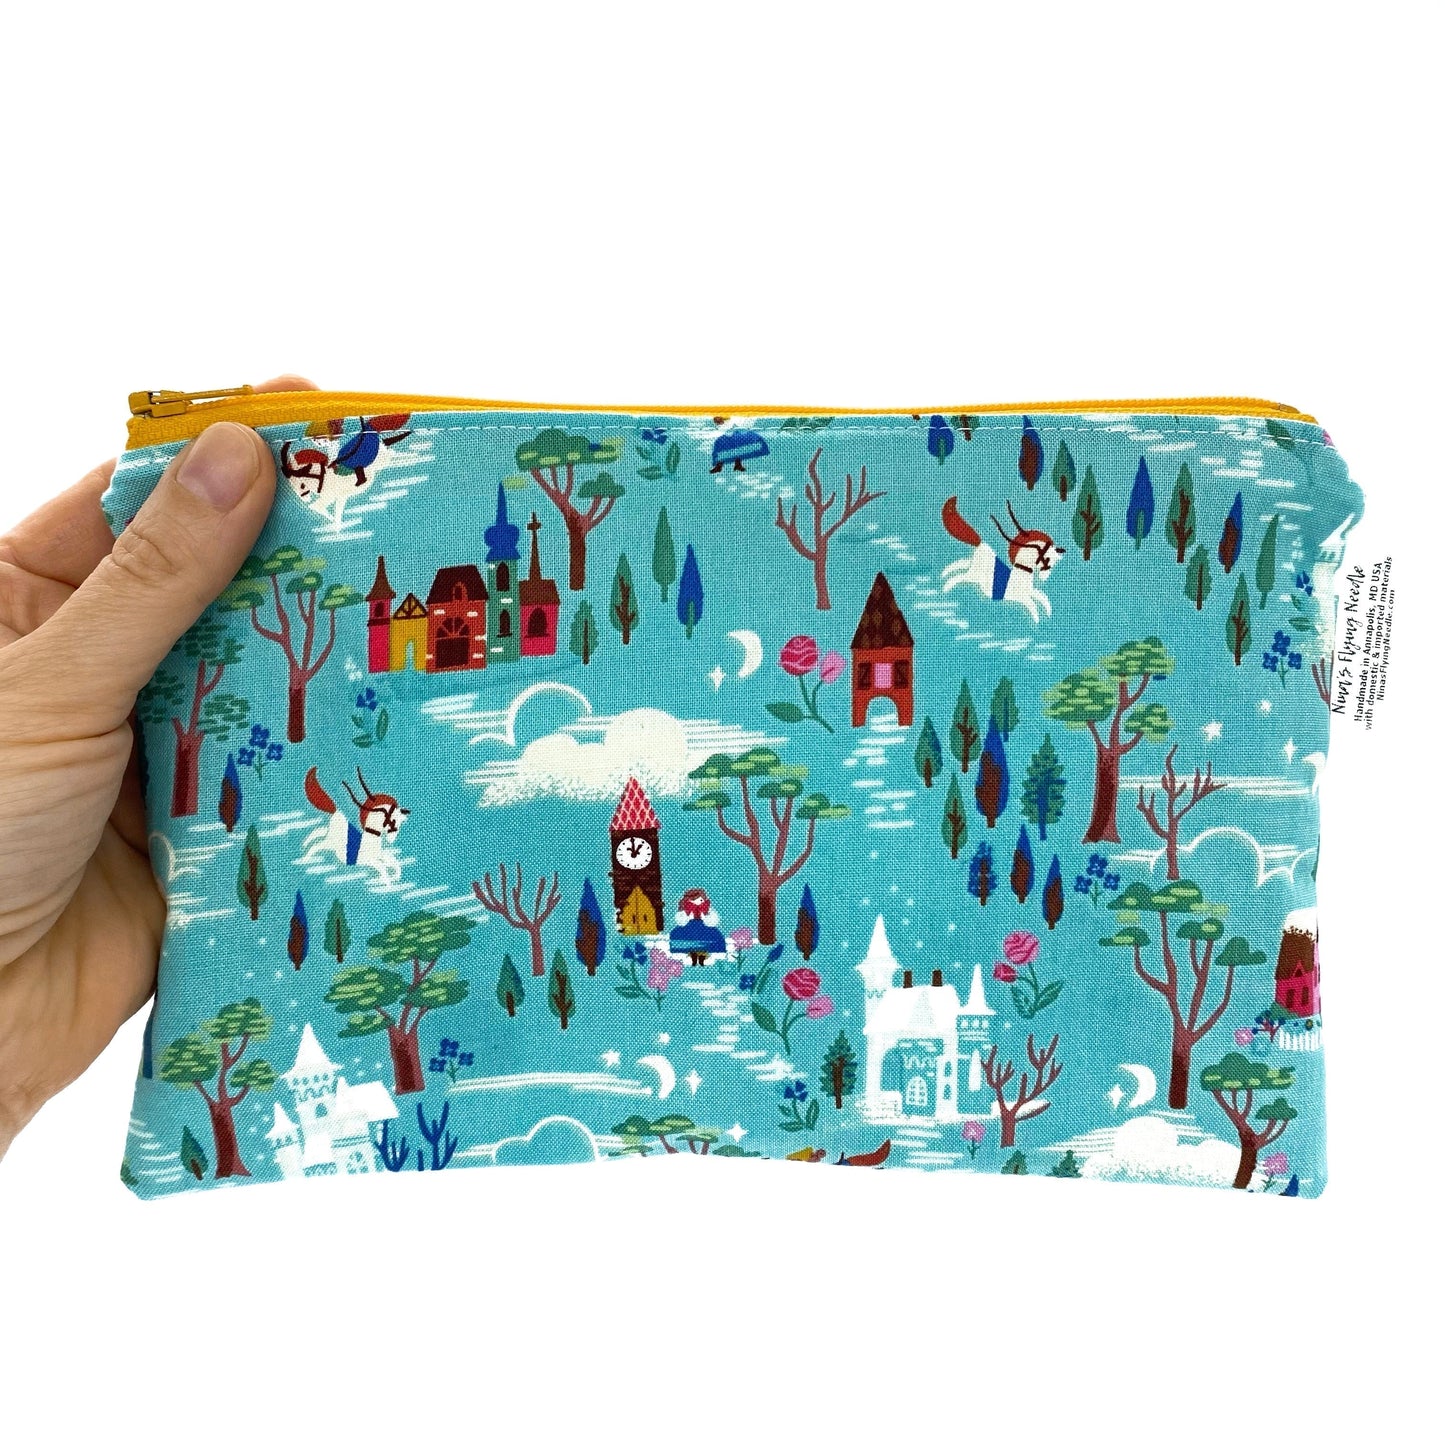 Snack Sized Reusable Zippered Bag Planet Earth